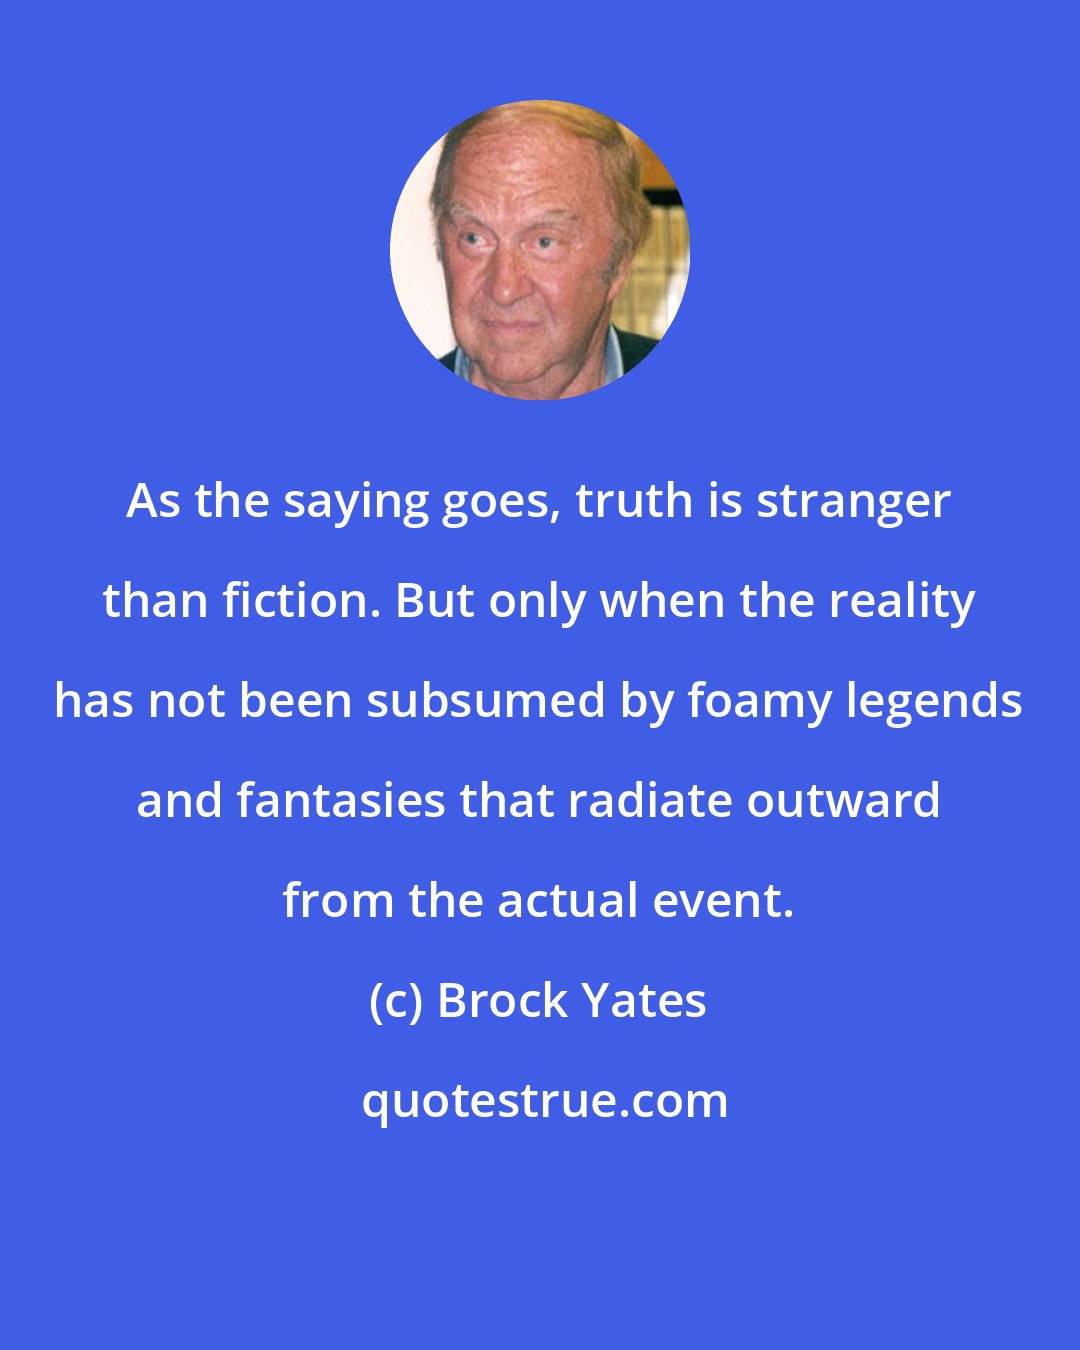 Brock Yates: As the saying goes, truth is stranger than fiction. But only when the reality has not been subsumed by foamy legends and fantasies that radiate outward from the actual event.